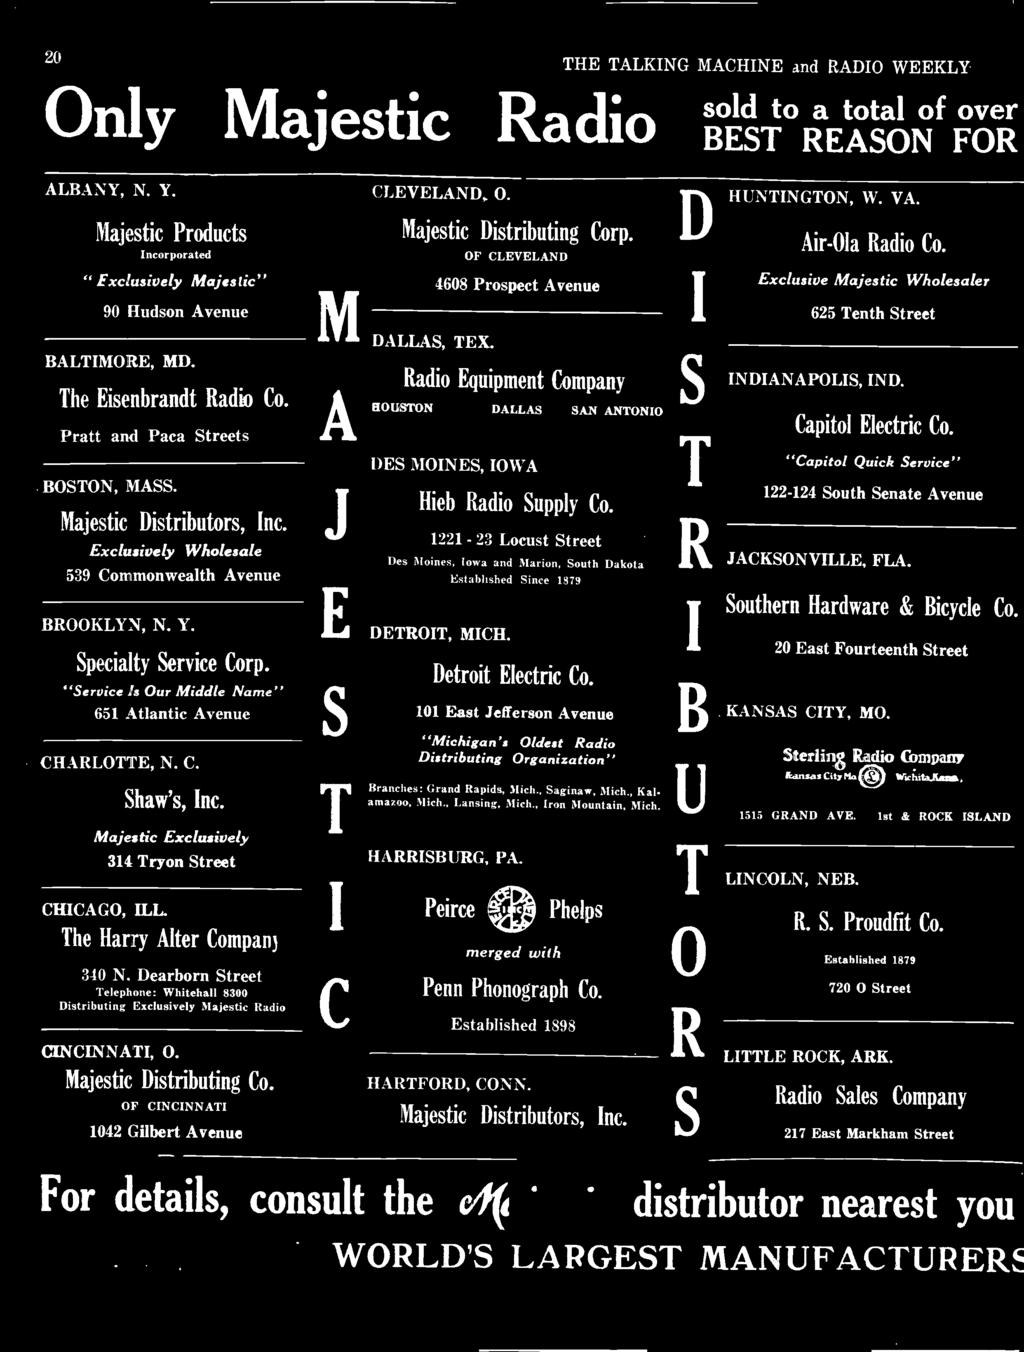 OnlyMaj estic Ra THE TALKING MACHINE and RADIO WEEKLY dio Sold to a total of over BEST REASON FOR ALBANY, N. Y. Majestic Products Incorporated " Exclusively Majestic" 90 Hudson Avenue BALTIMORE, MD.